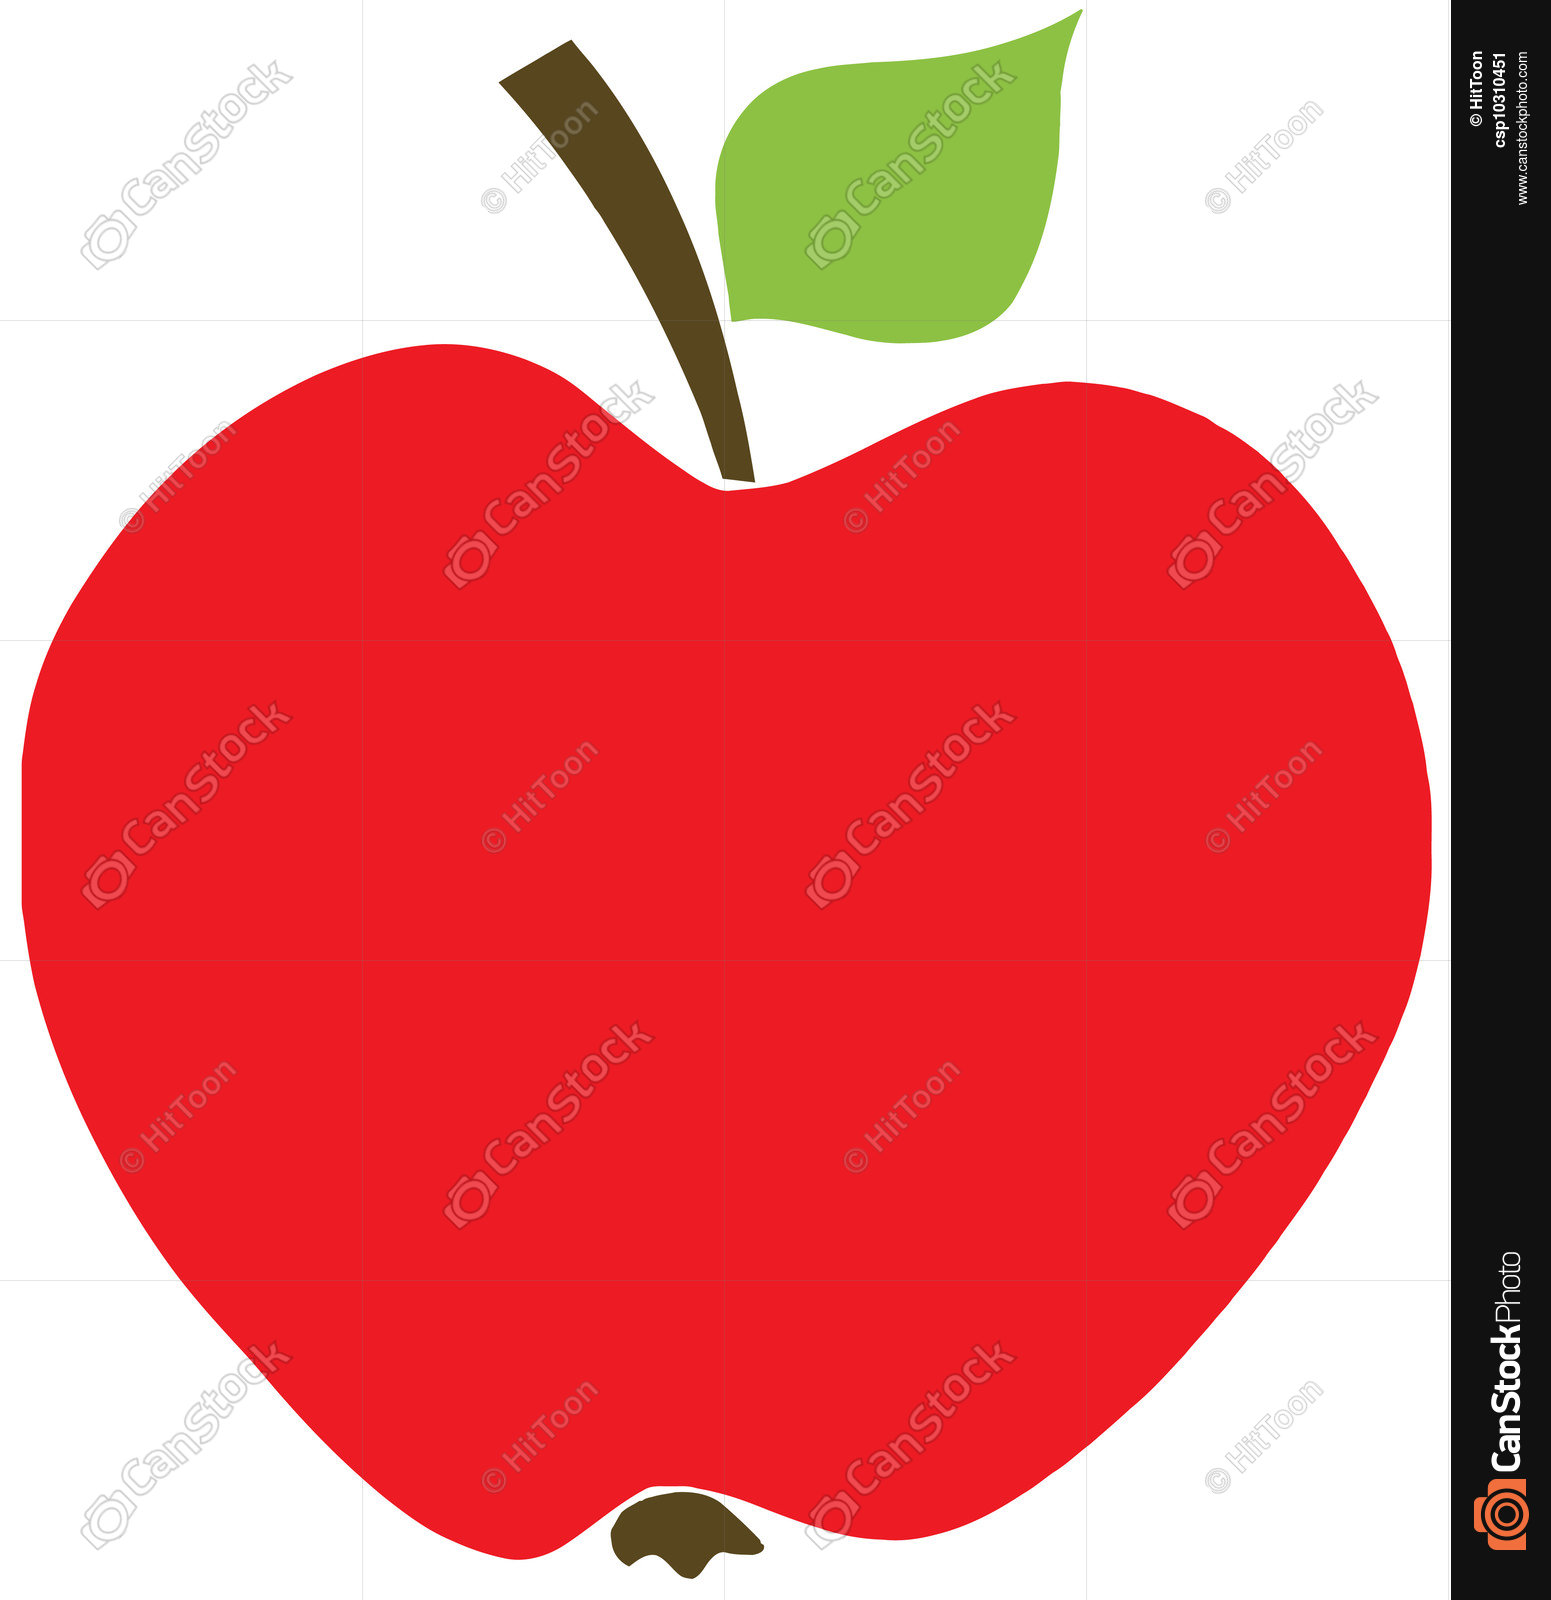 Red apple with handle and a leaf clipart vector - Search ...